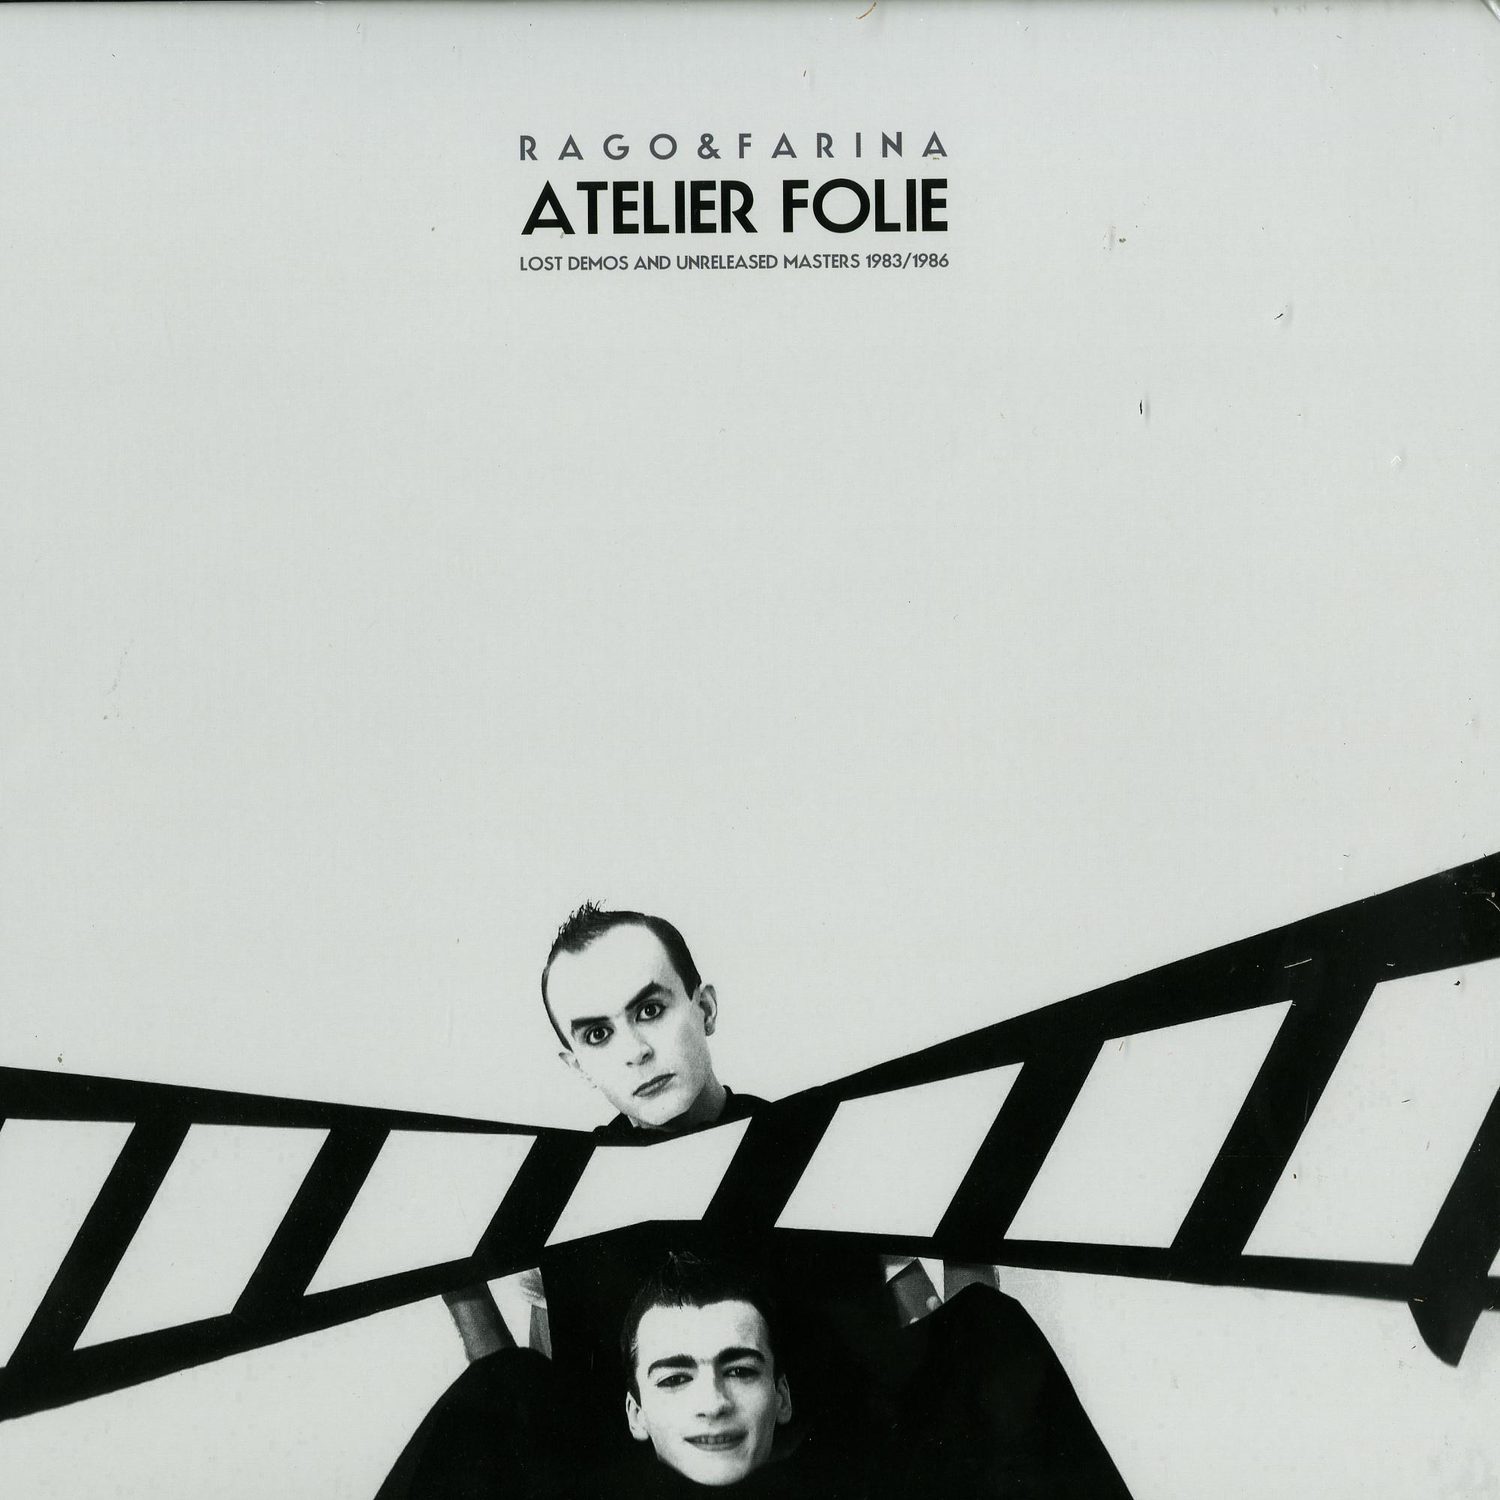 Atelier Folie - LOST DEMOS AND UNRELEASED MASTERS 1983/1986 